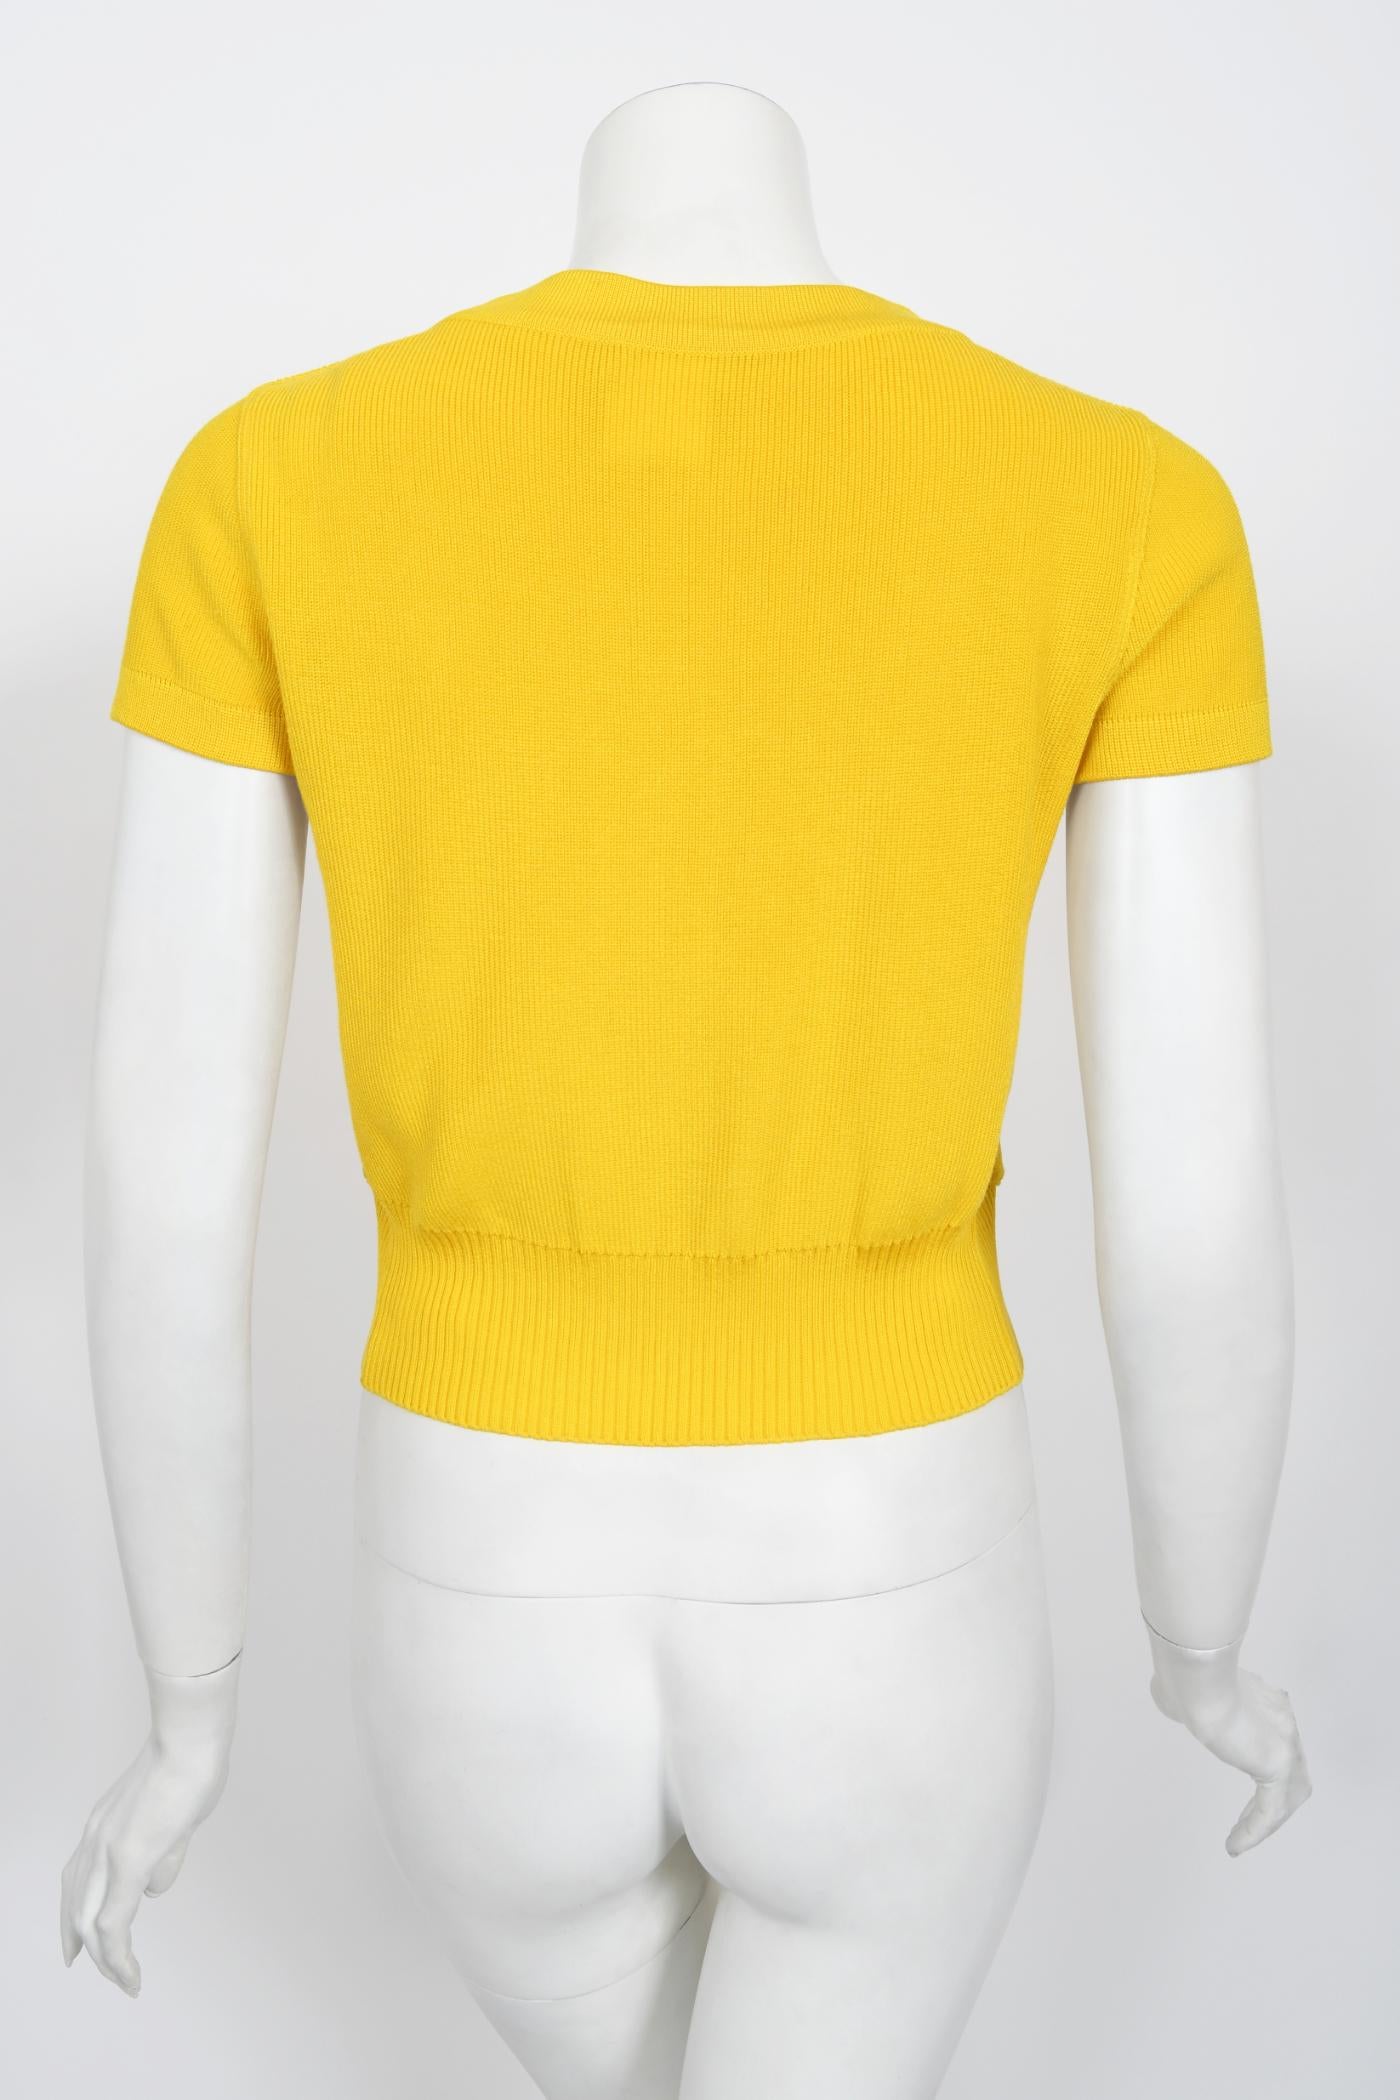 Vintage 1996 Chanel by Karl Lagerfeld Runway Yellow Knit Cropped Sweater Set  9